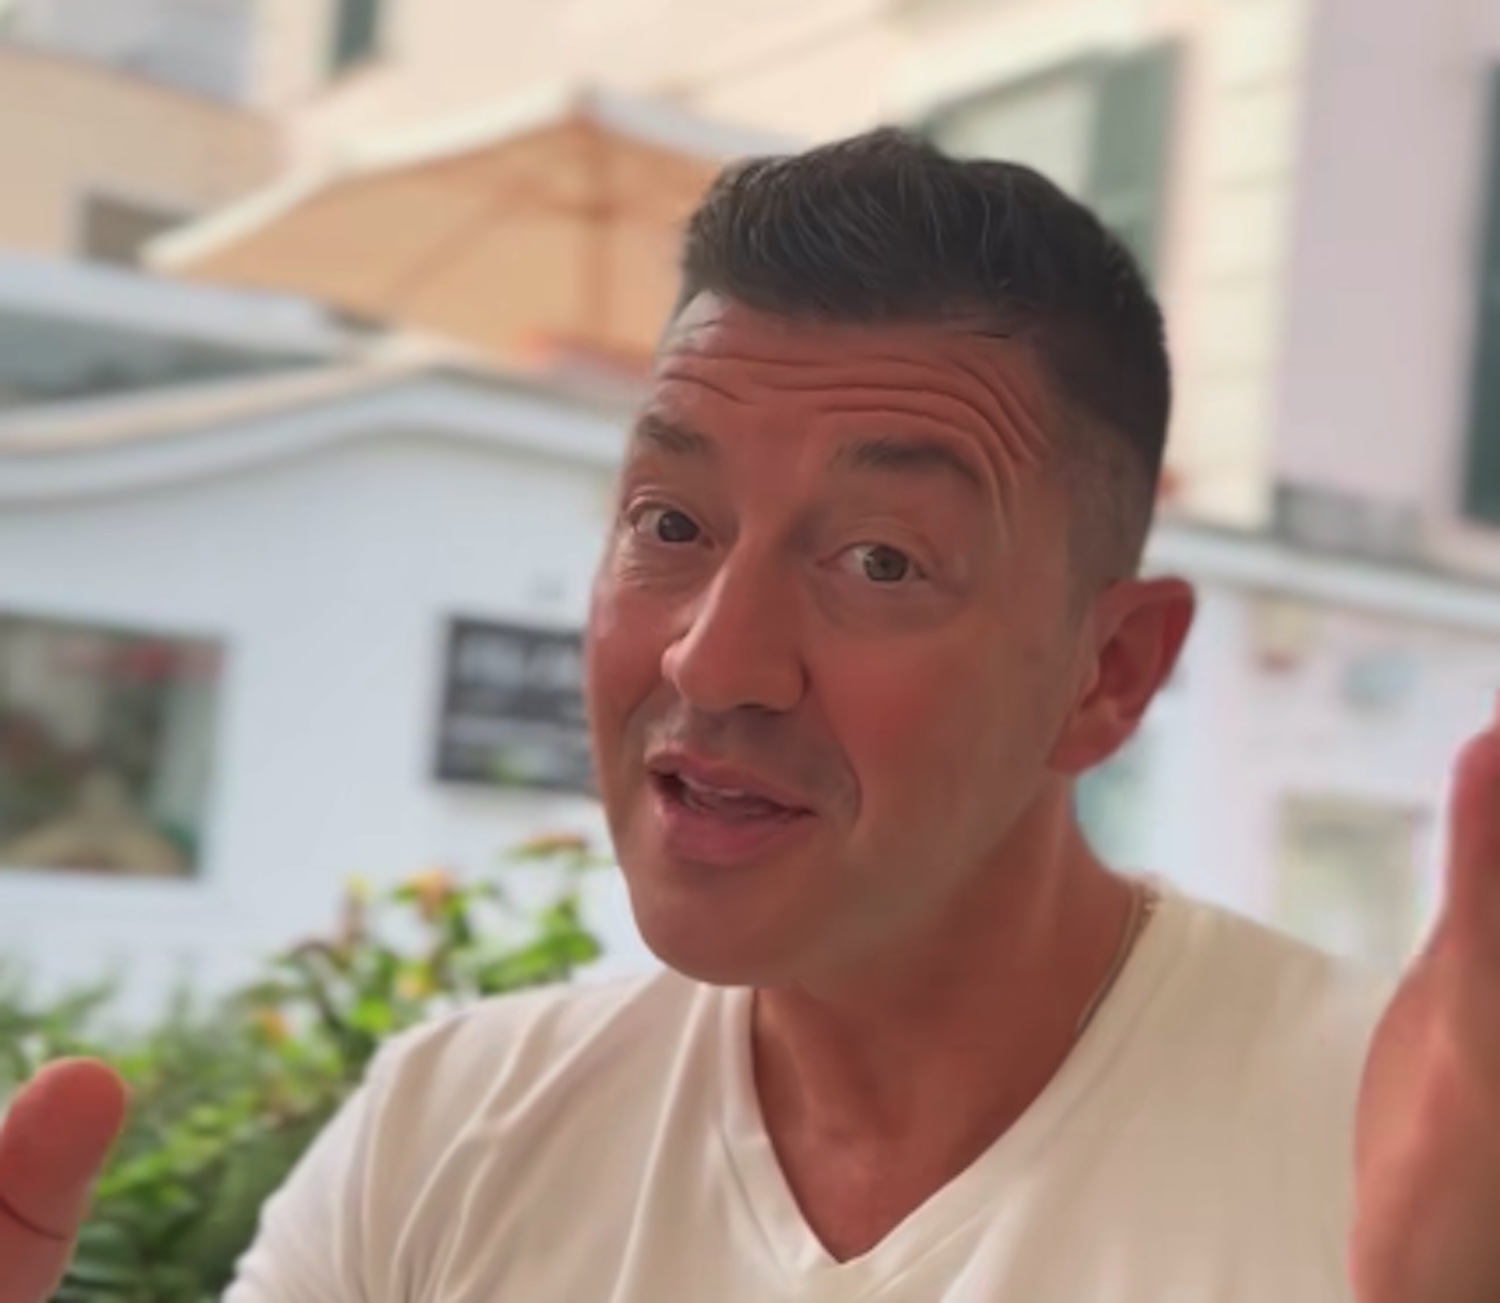 The case of the influencer who disappointed the pizza chef Porzio in Naples, the stories disappear when the receipt arrives.  She defends herself and he responds – on video